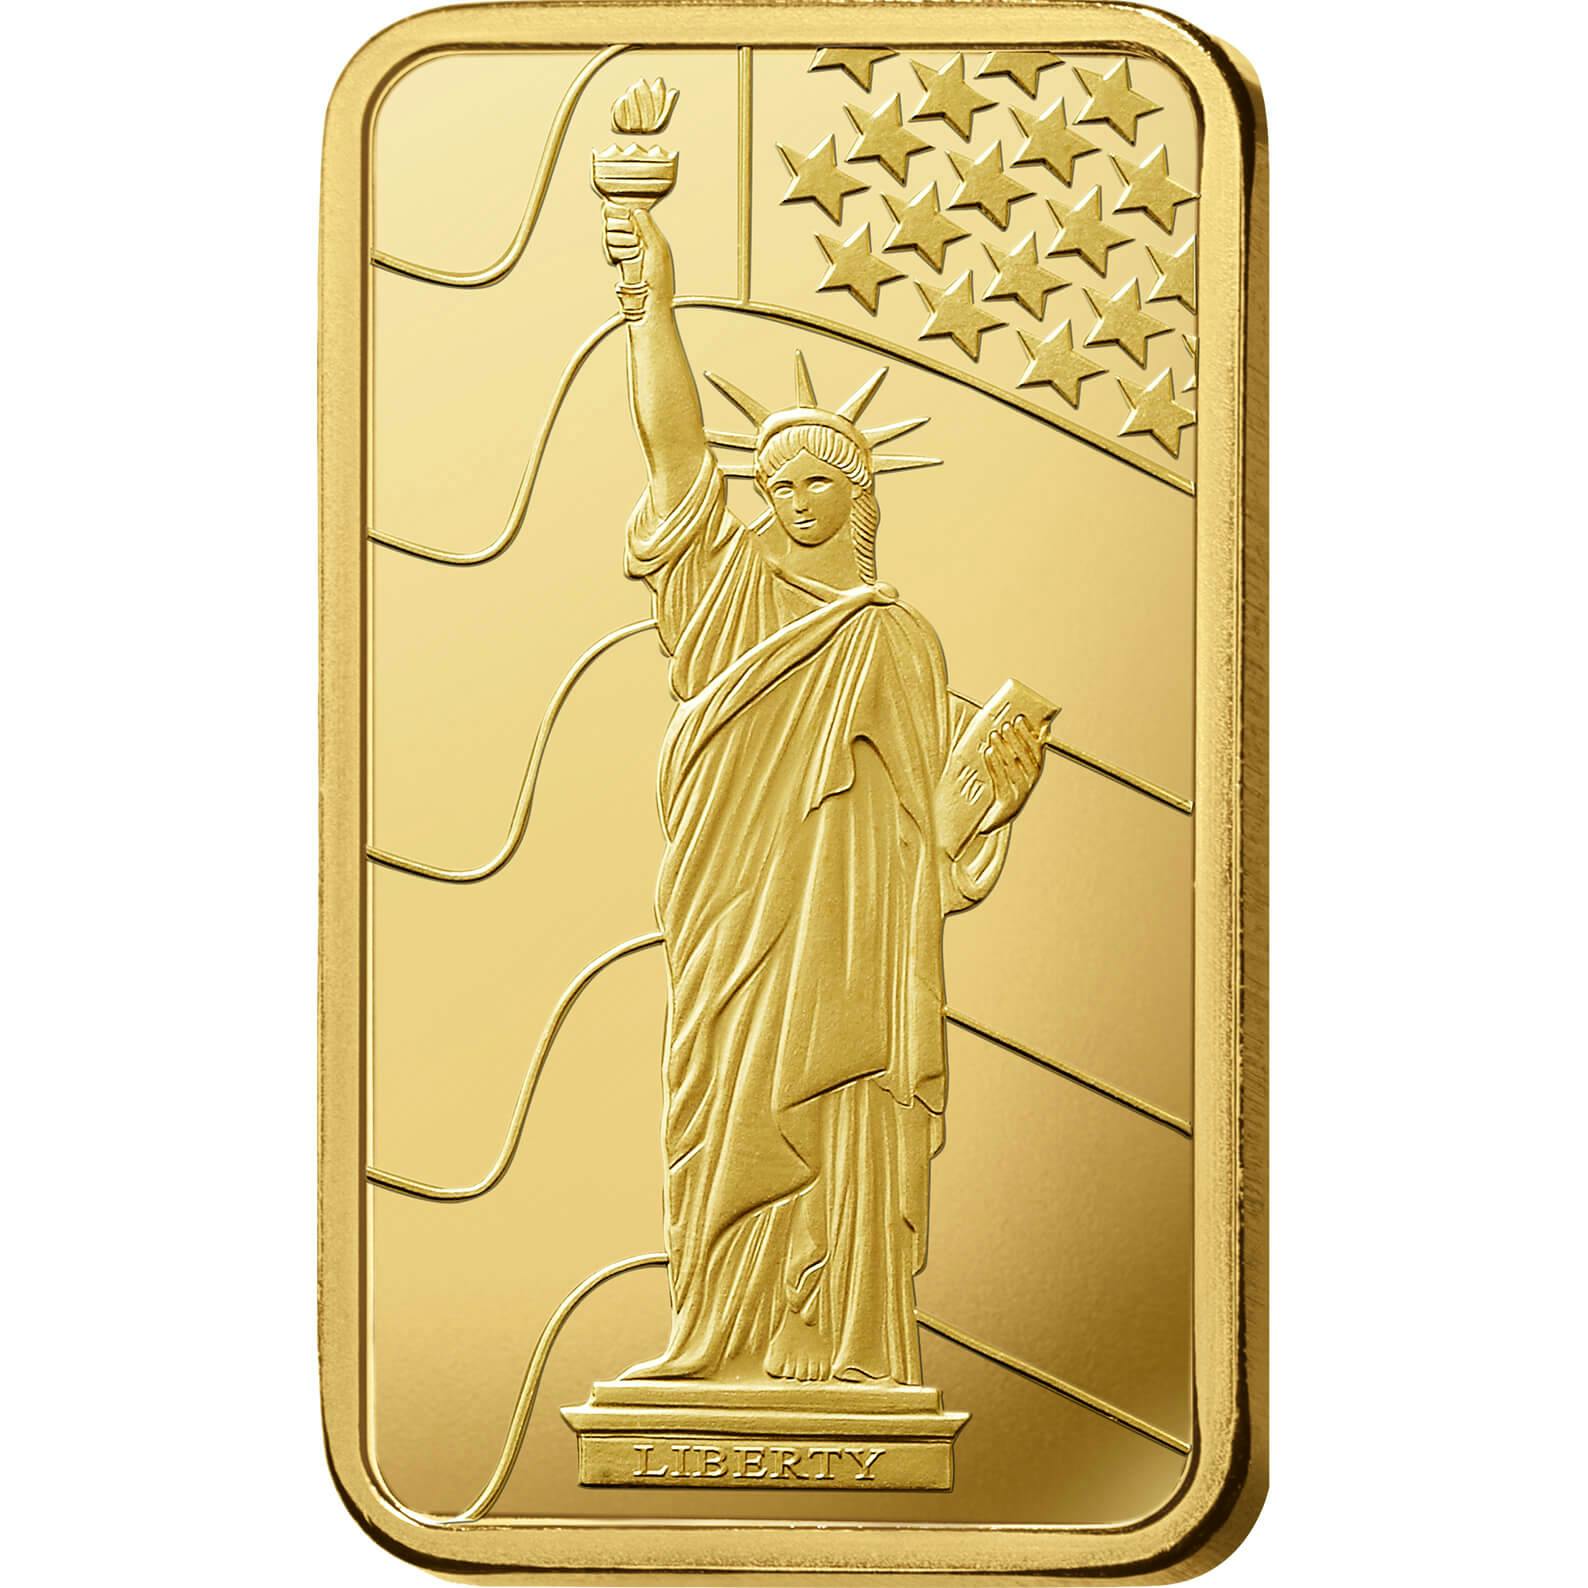 Achat d'or, 1 oz d'or pur Liberty - PAMP Suisse - Front 